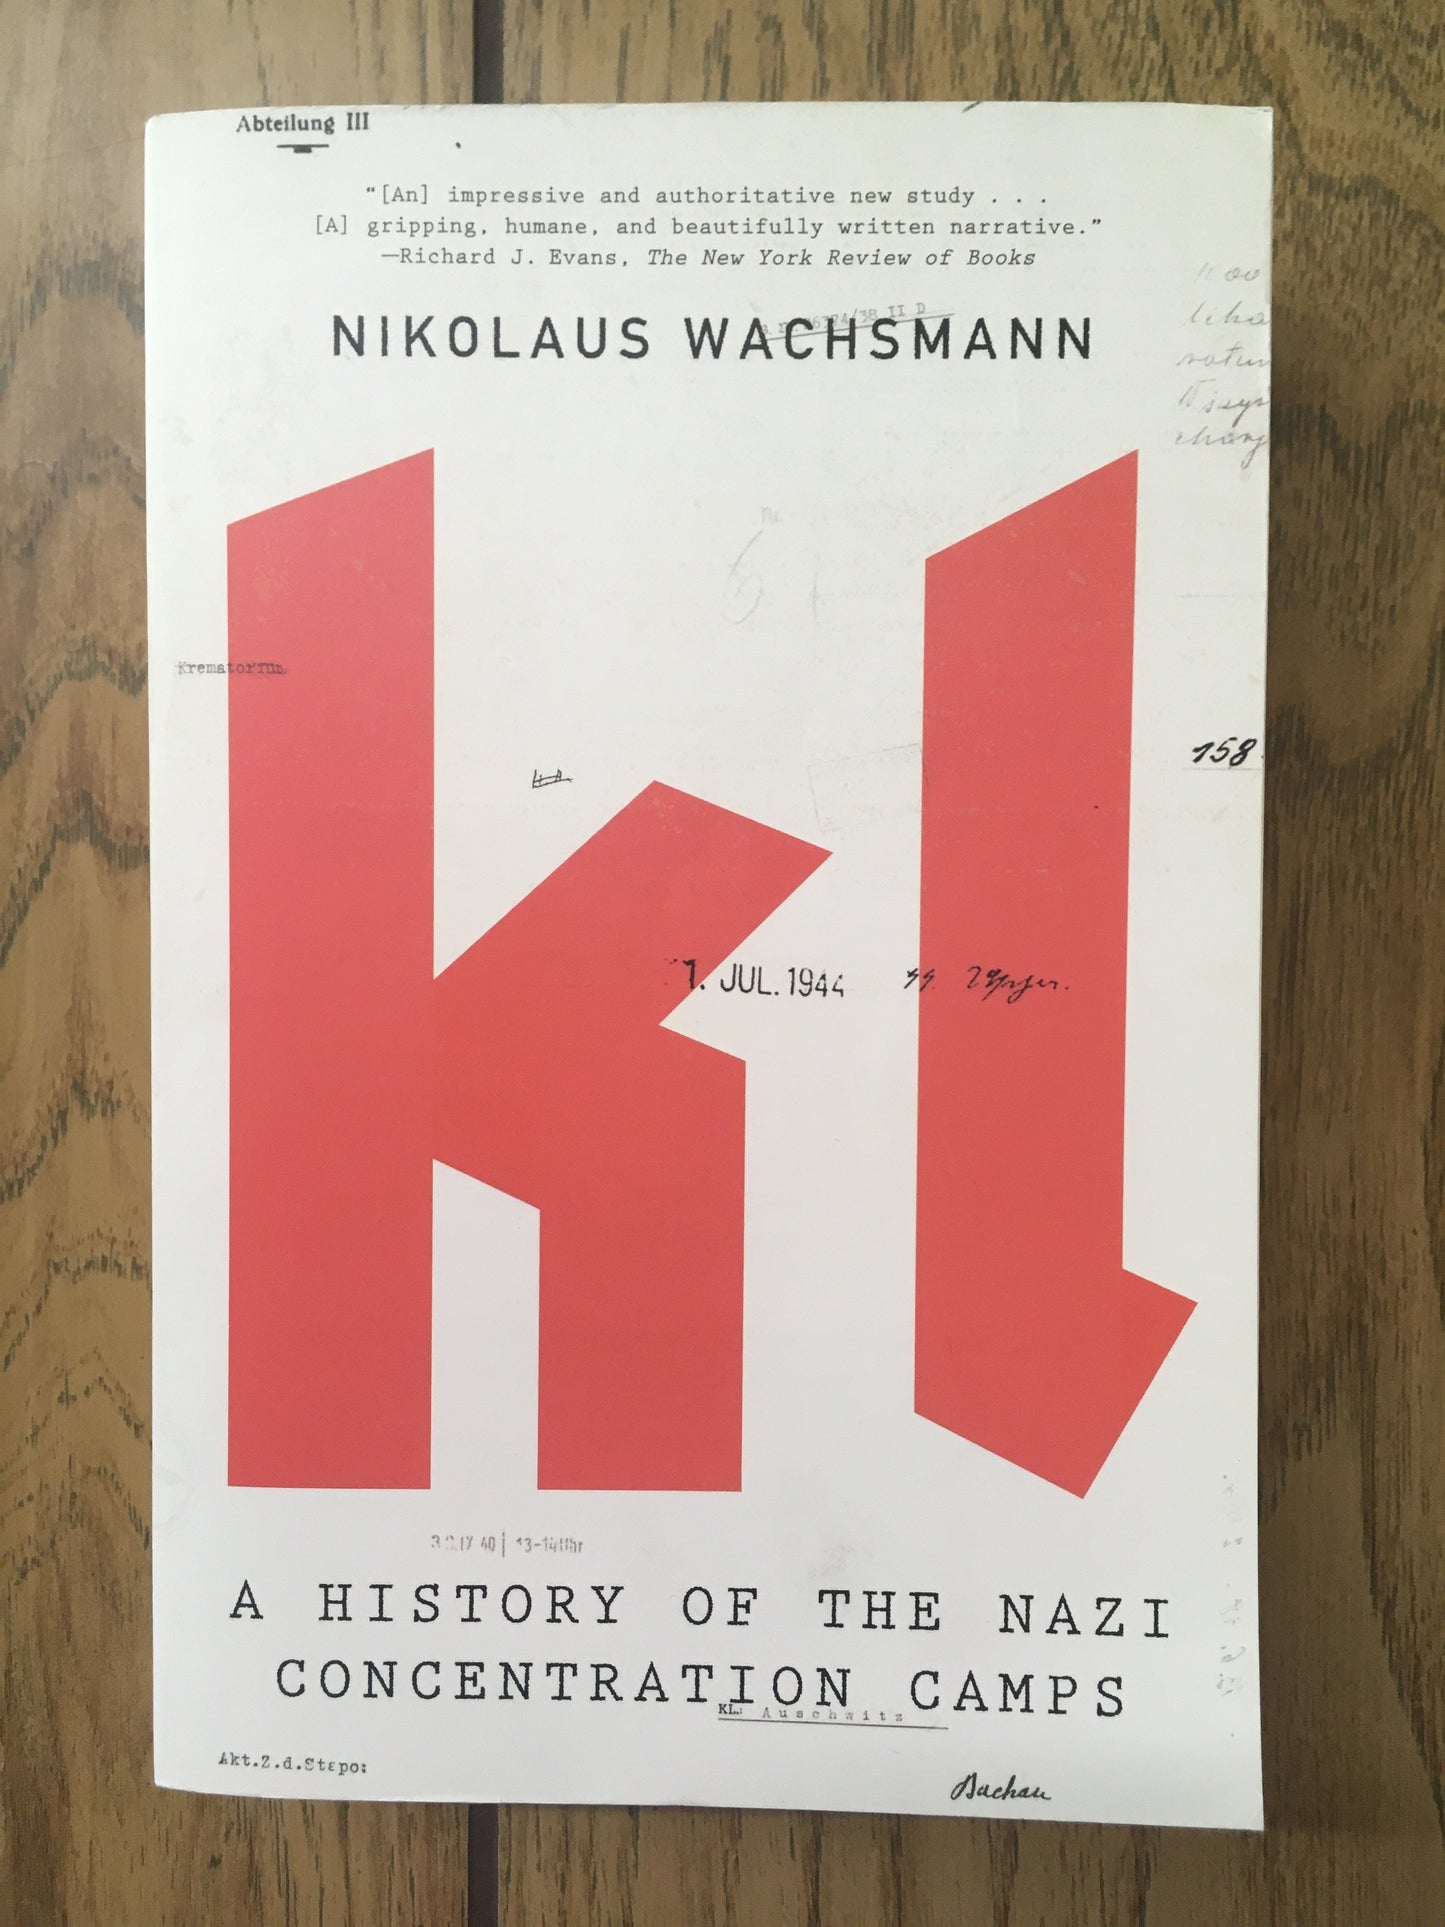 KL: A History of the Nazi Concentration Camps